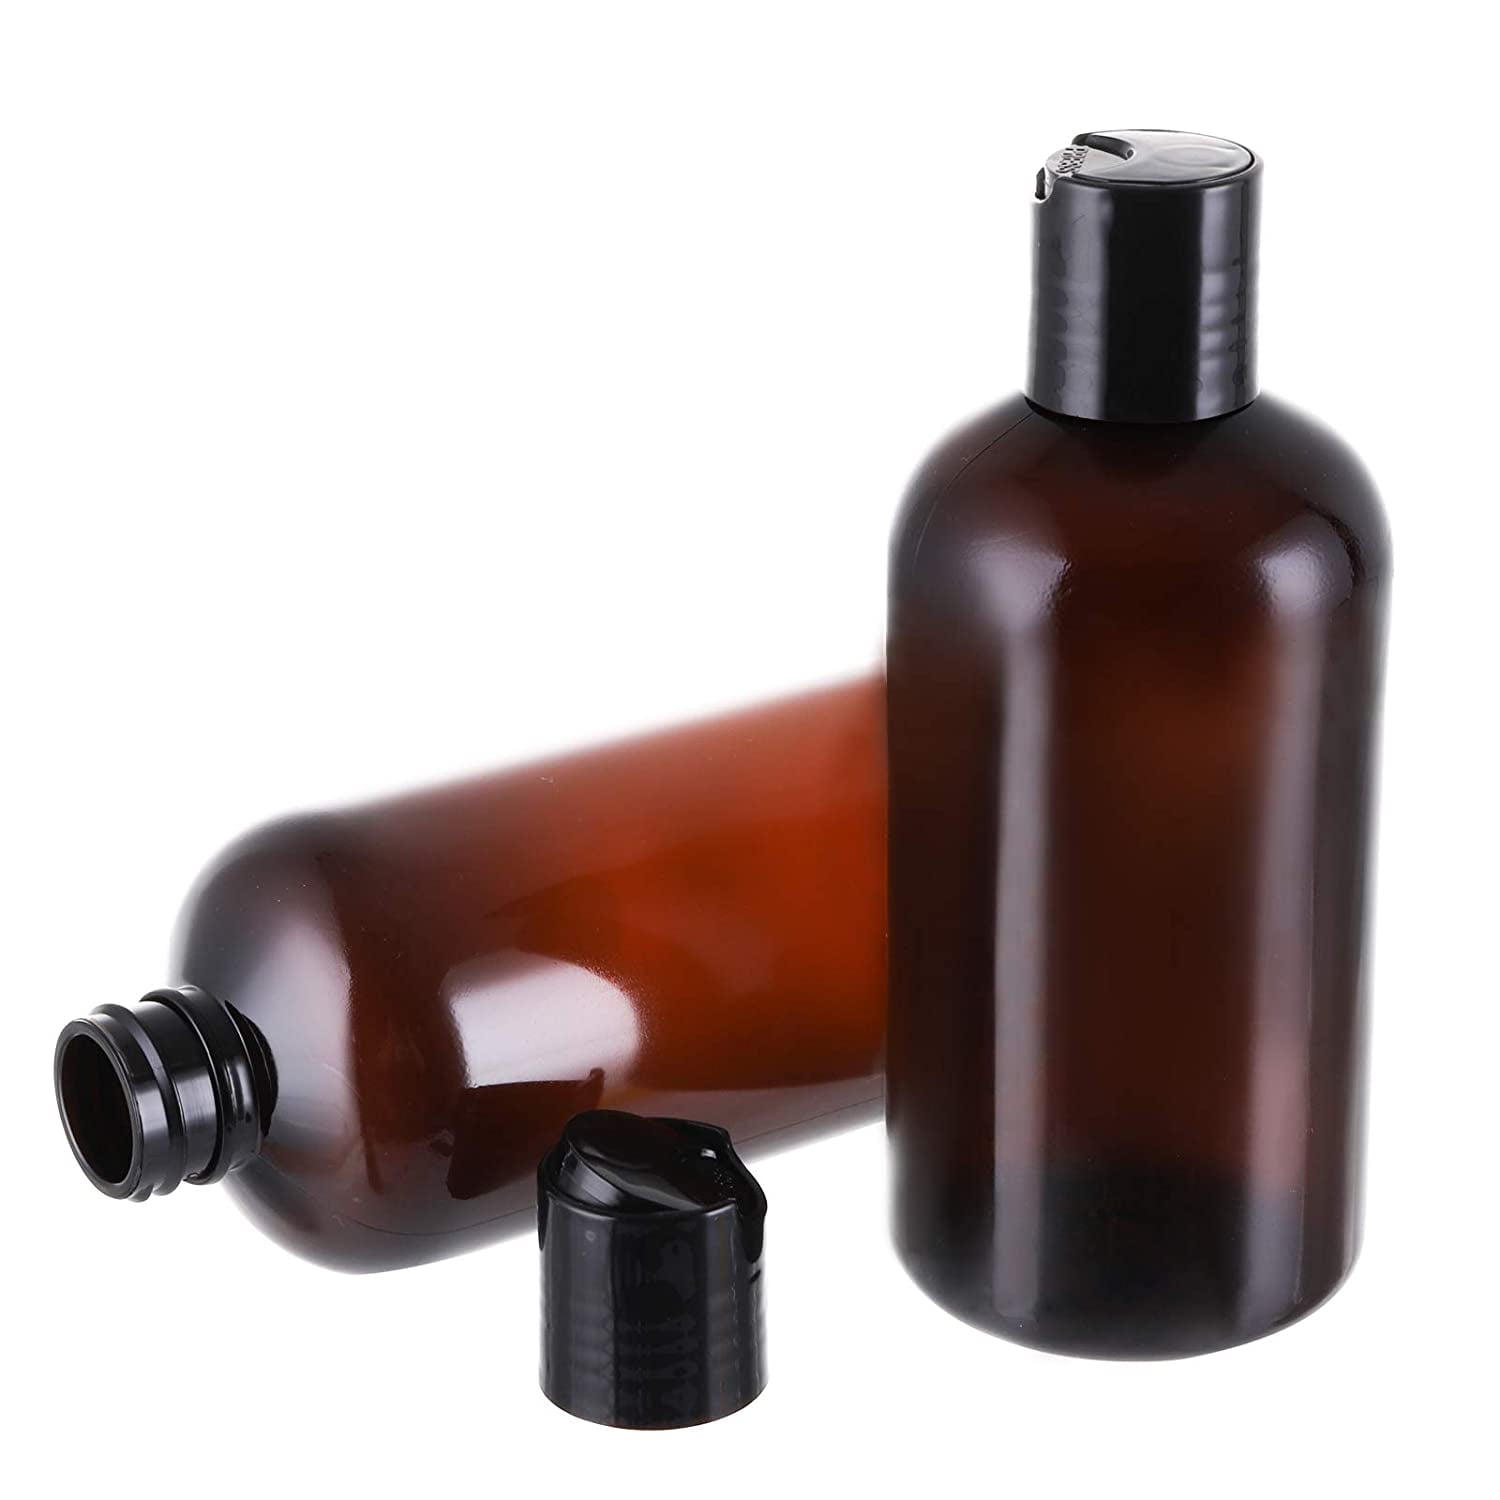 8oz Plastic Amber Bottles Labels Included BPA-Free Squeeze Containers with Disc Cap 6 Pack 